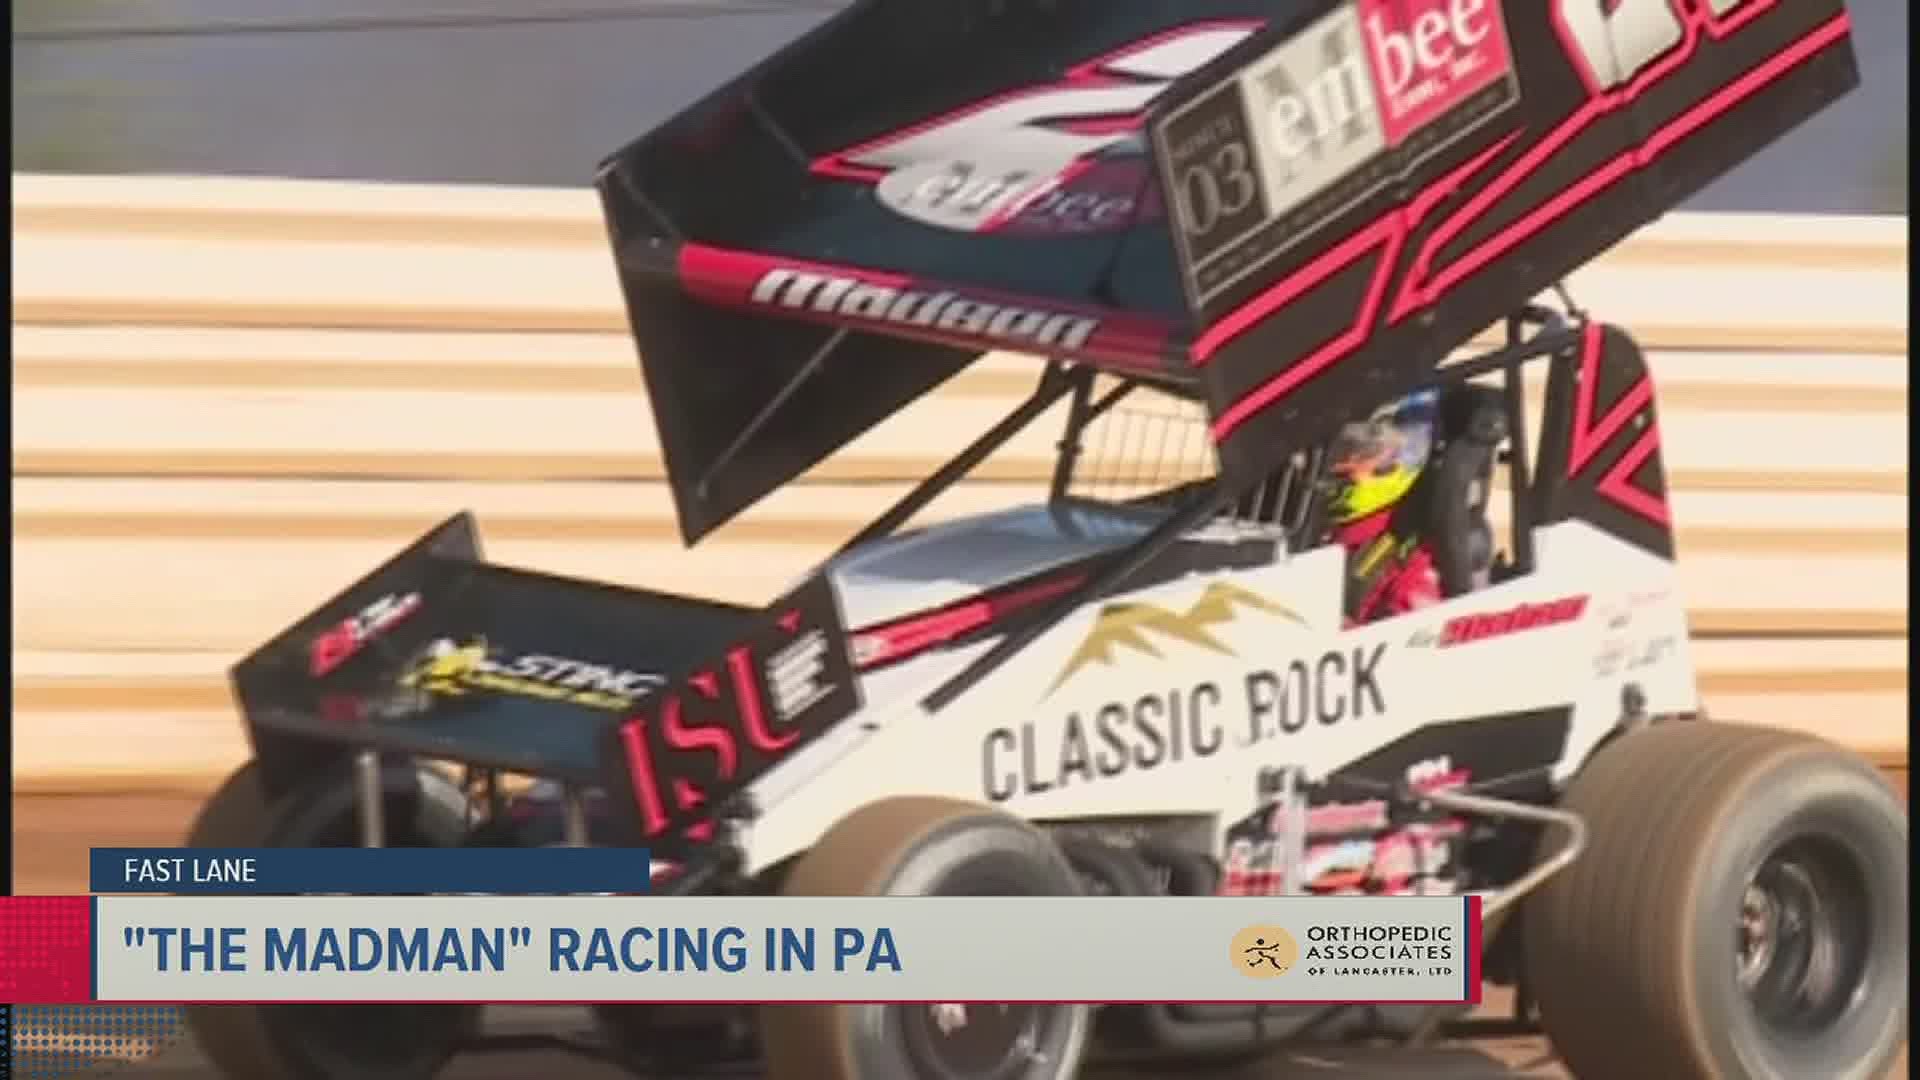 Kerry Madsen teamed up with Barshinger Racing to race in Central PA.